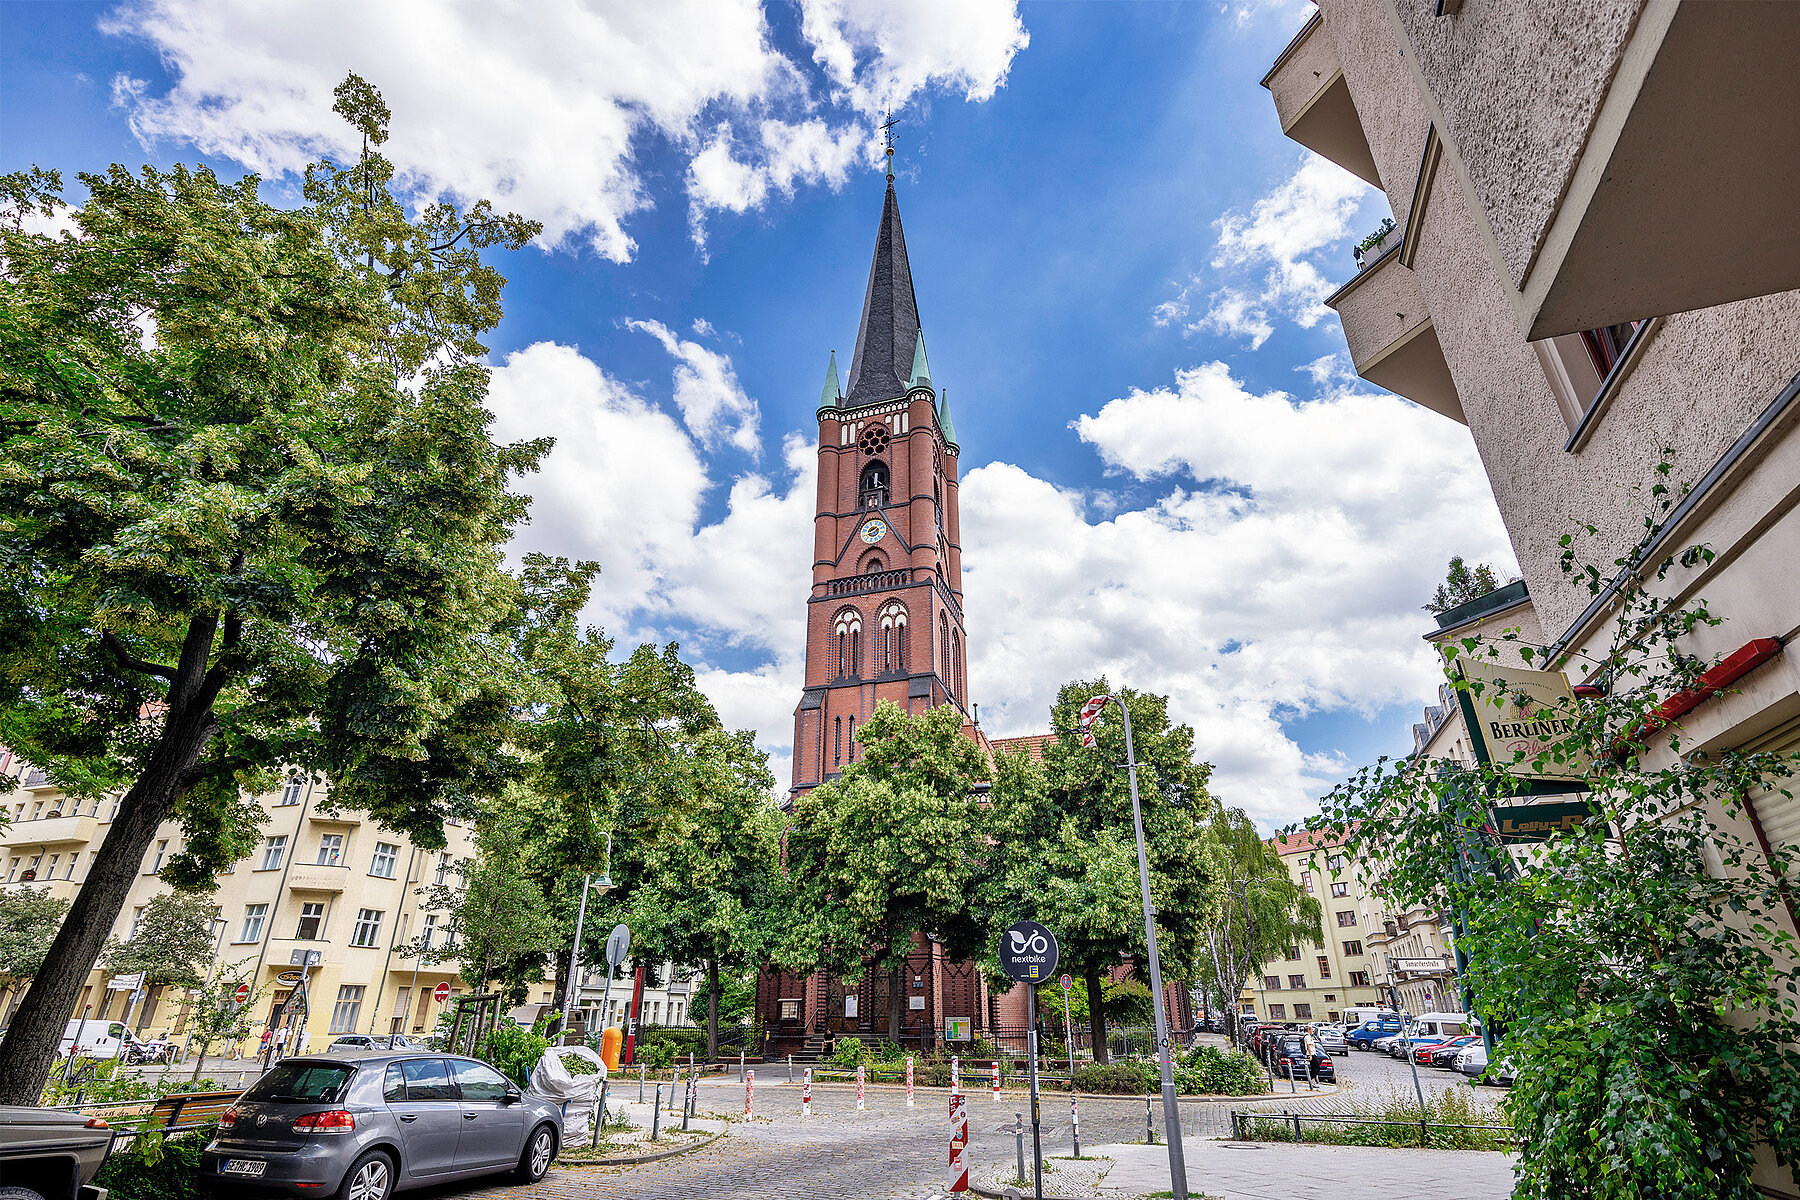 The red brick Samariterkirche stands on a traffic island. It is surrounded by houses and trees.